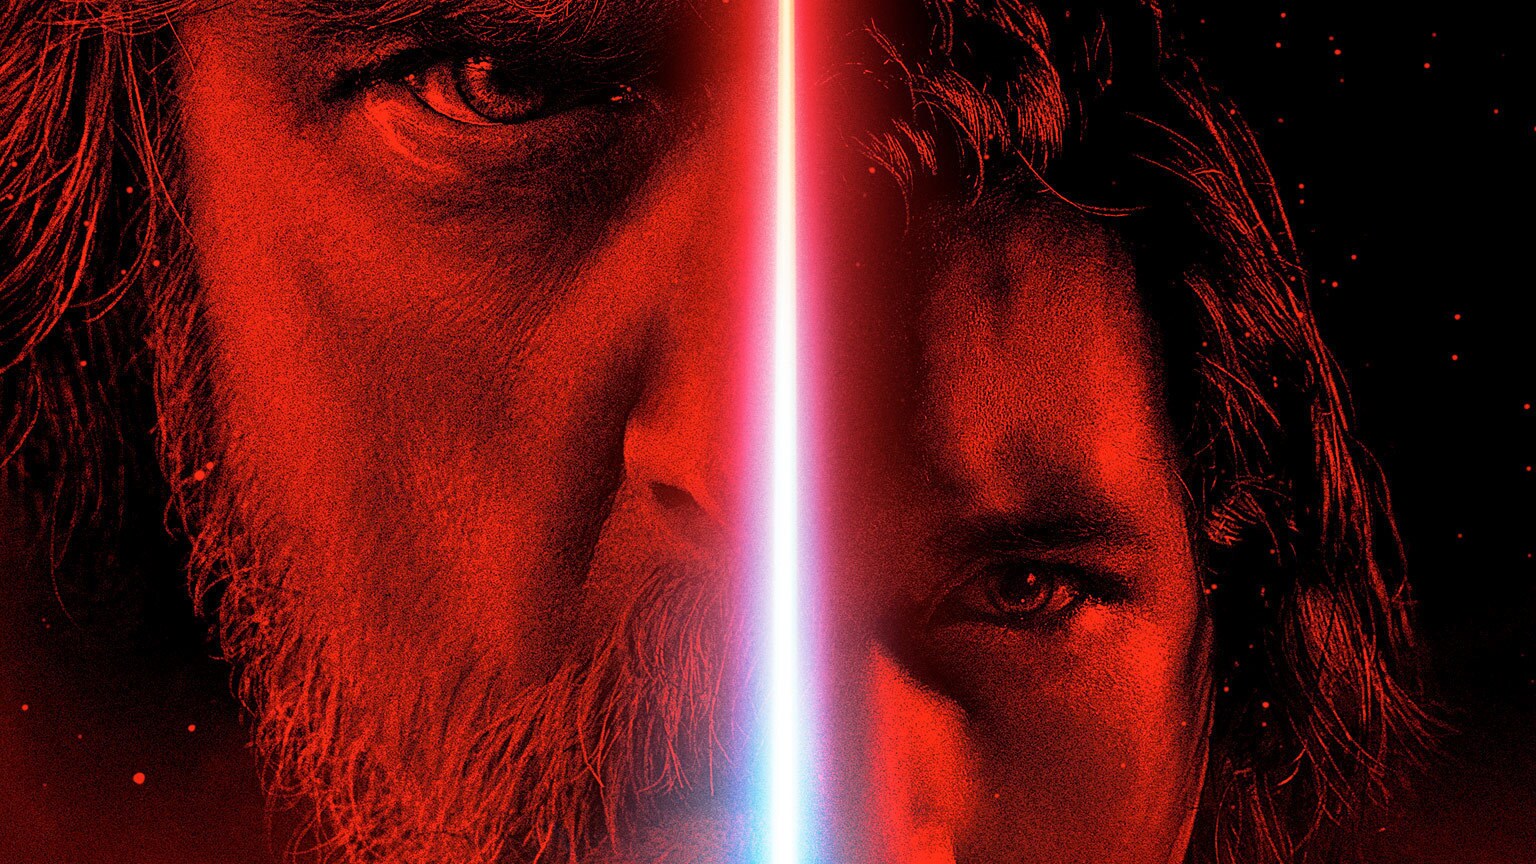 7 Reasons Why The Last Jedi Novelization is Essential